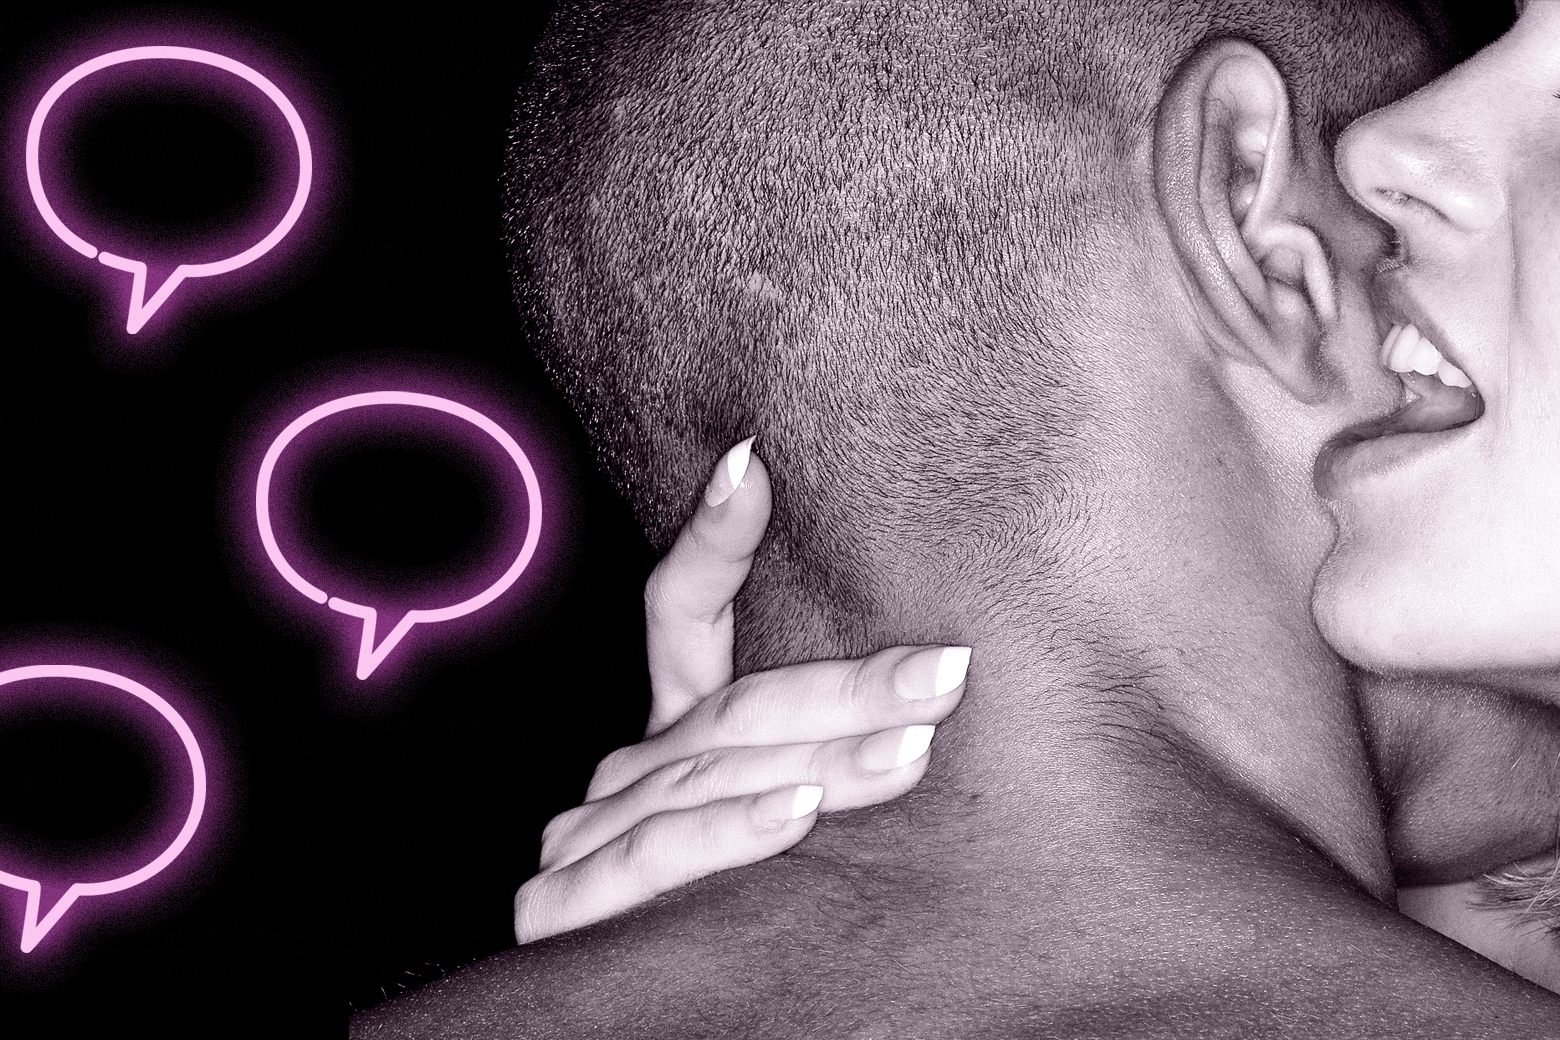 GIF of a woman whispering into a man's ear while neon speech bubbles glow in the background.